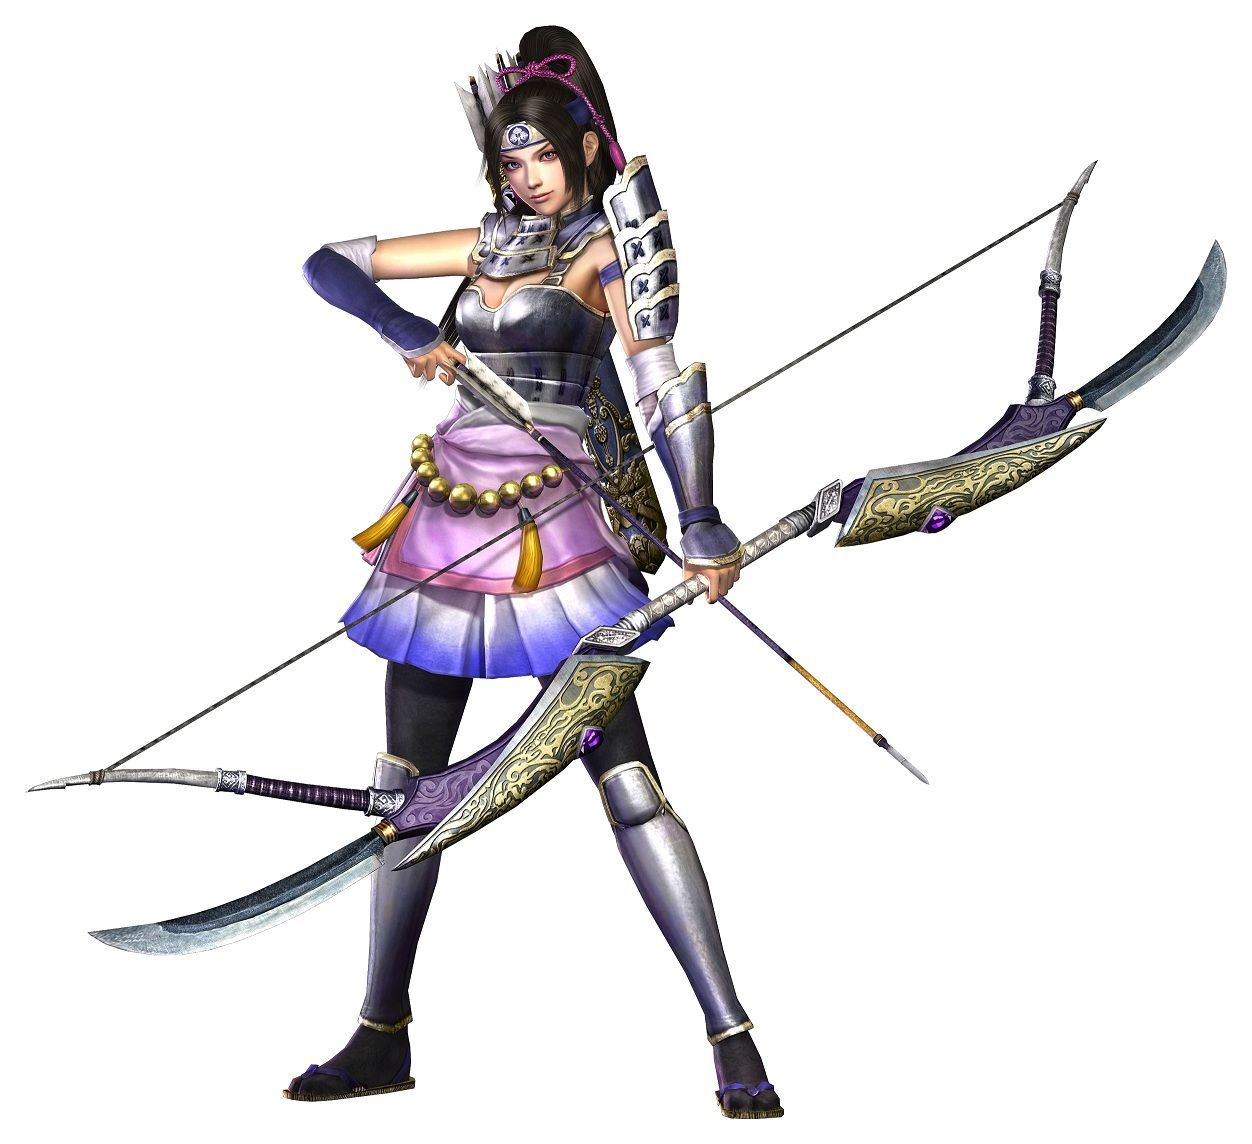 Image of the character in the Samurai Warriors series summary 69